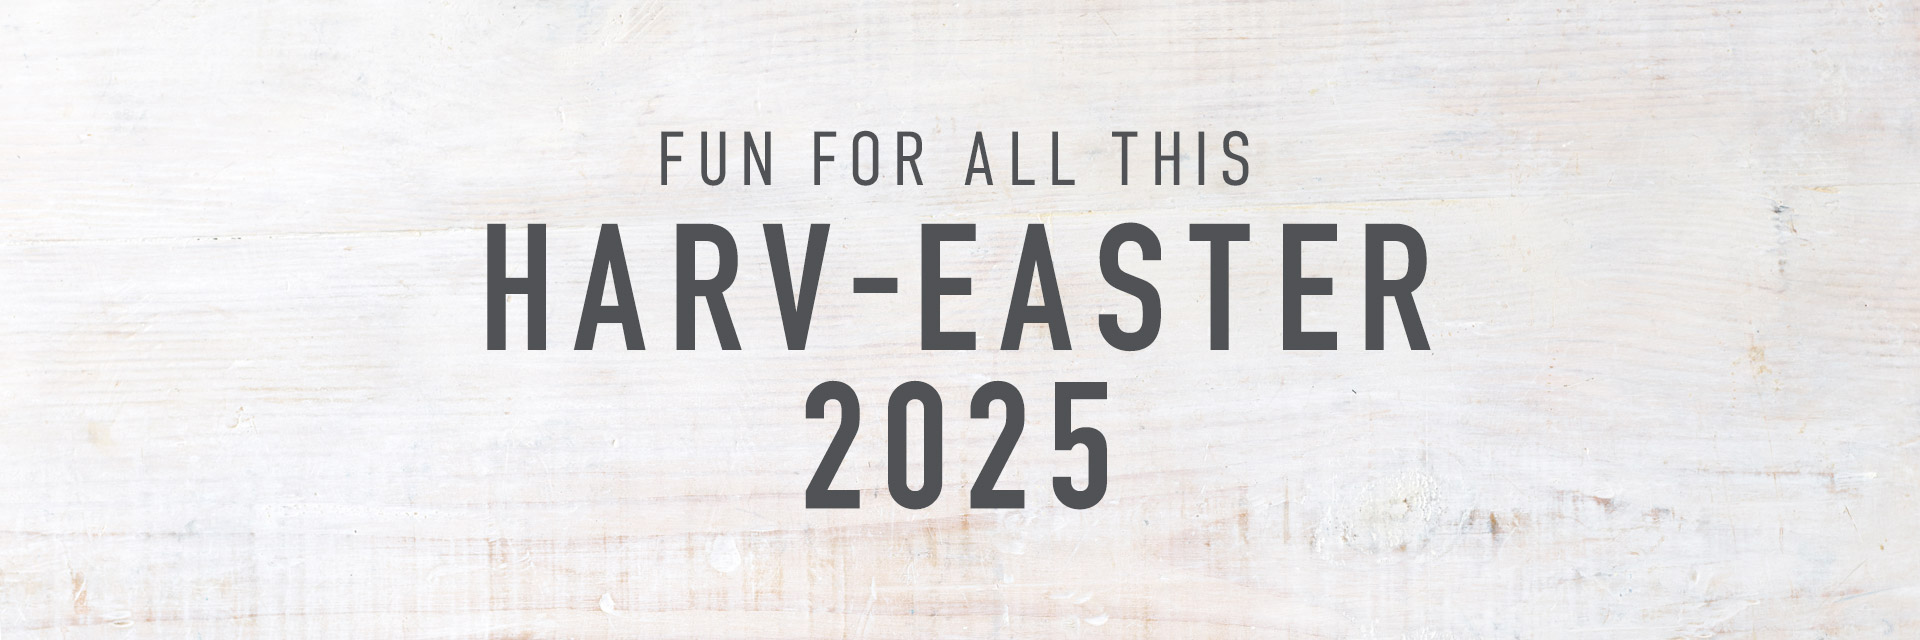 Easter at Harvester Poole in Poole 2025